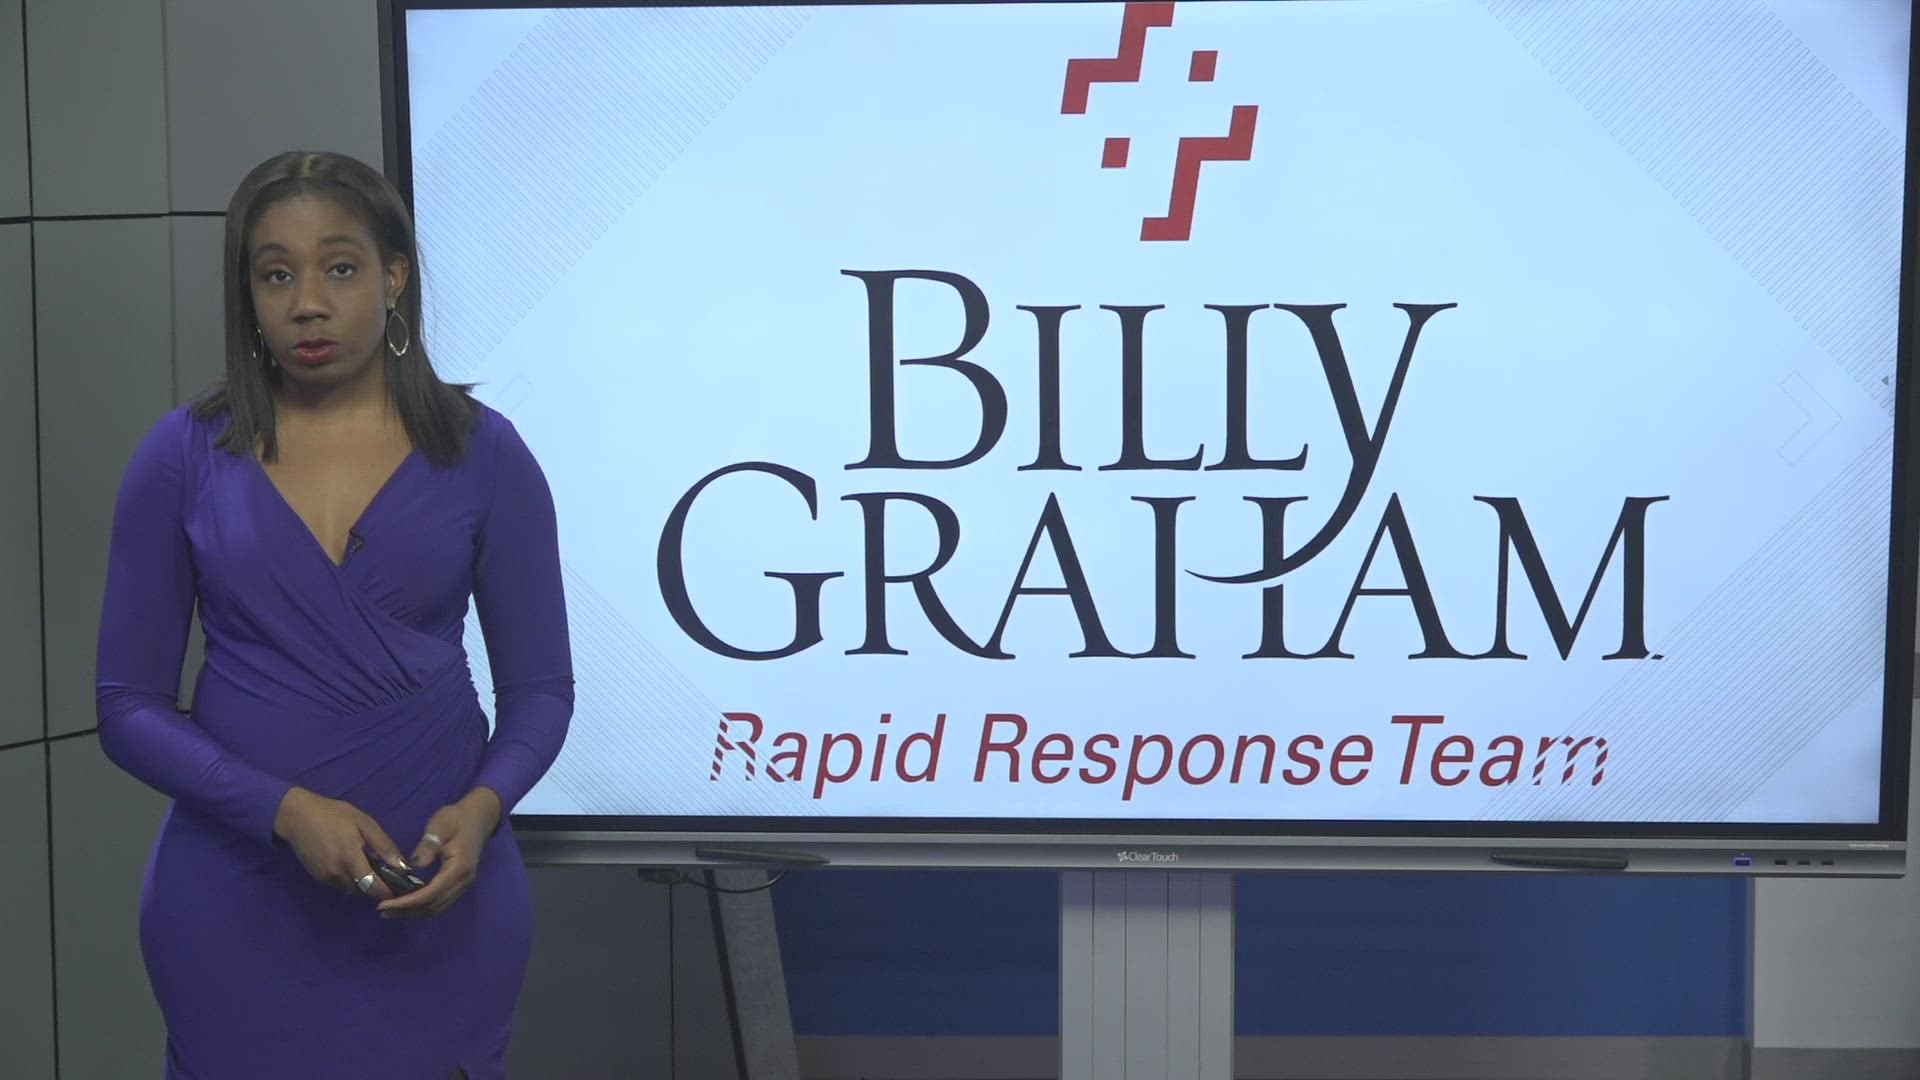 The Billy Graham Rapid Response Team is a grief ministry that deploys crisis-trained chaplains to provide emotional and spiritual care.